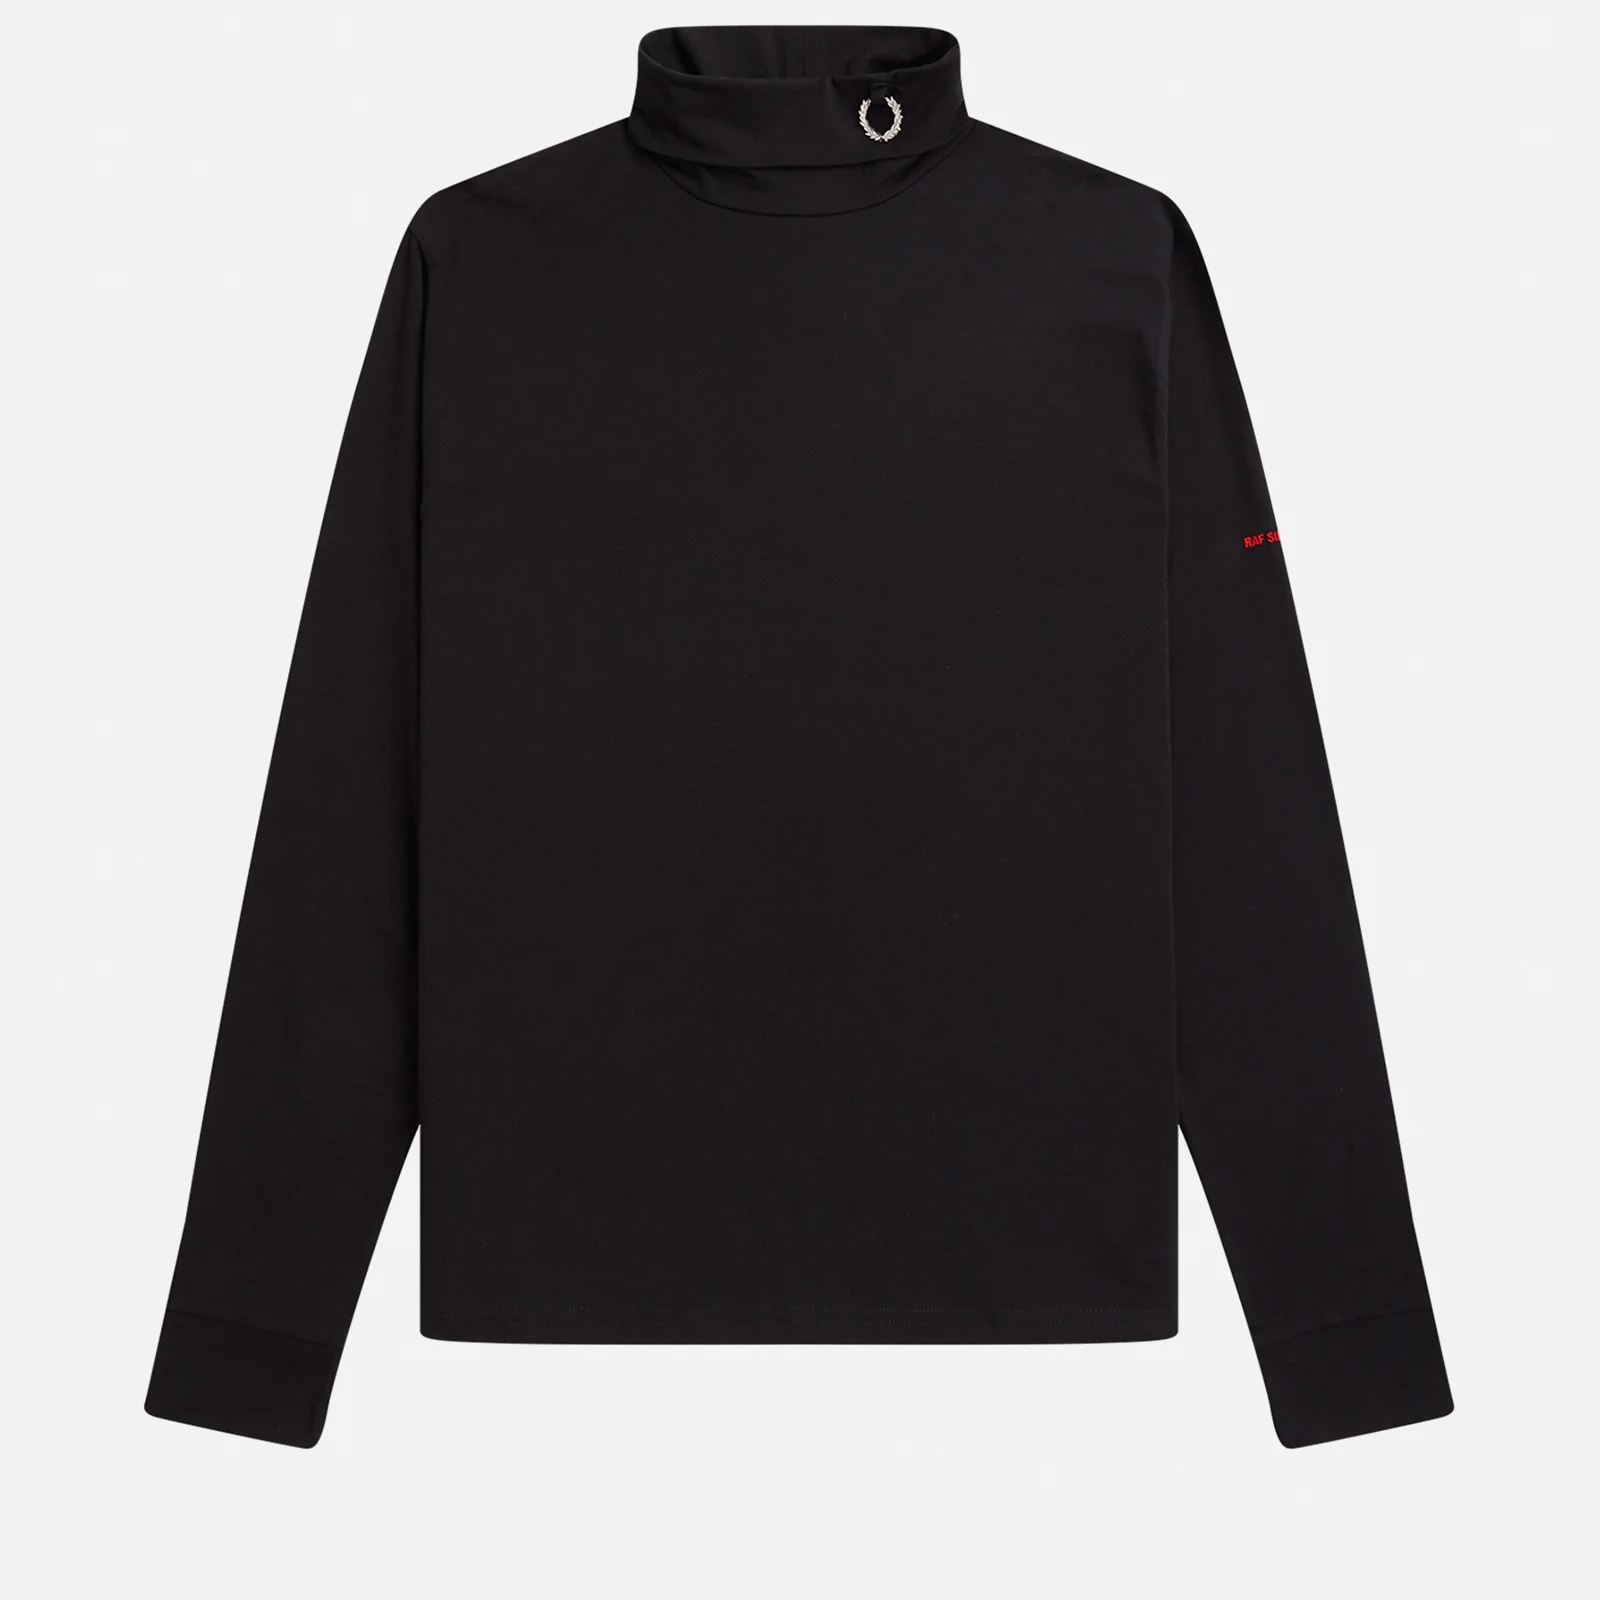 Fred Perry x Raf Simons Cotton-Blend Rollneck Jumper Image 1